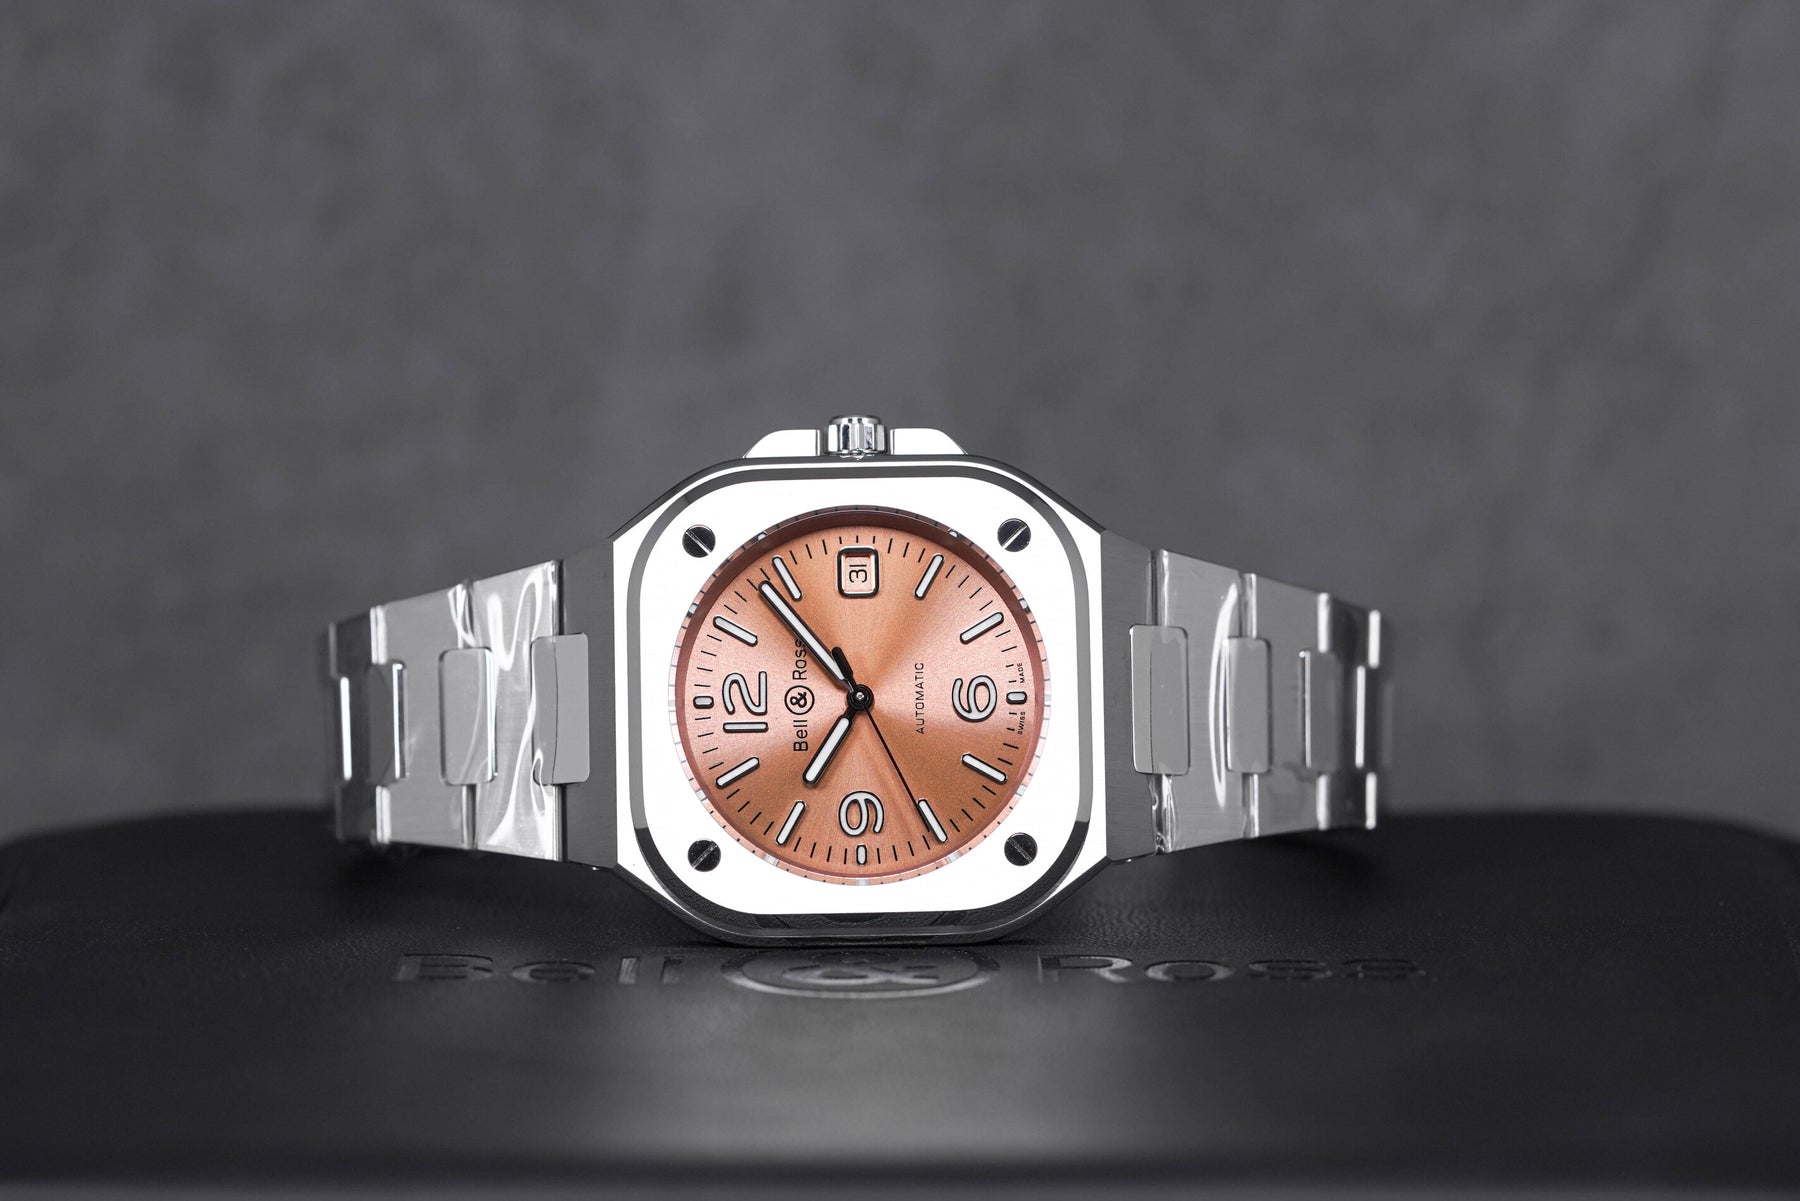 BELL & ROSS BR 05 COPPER BROWN DIAL